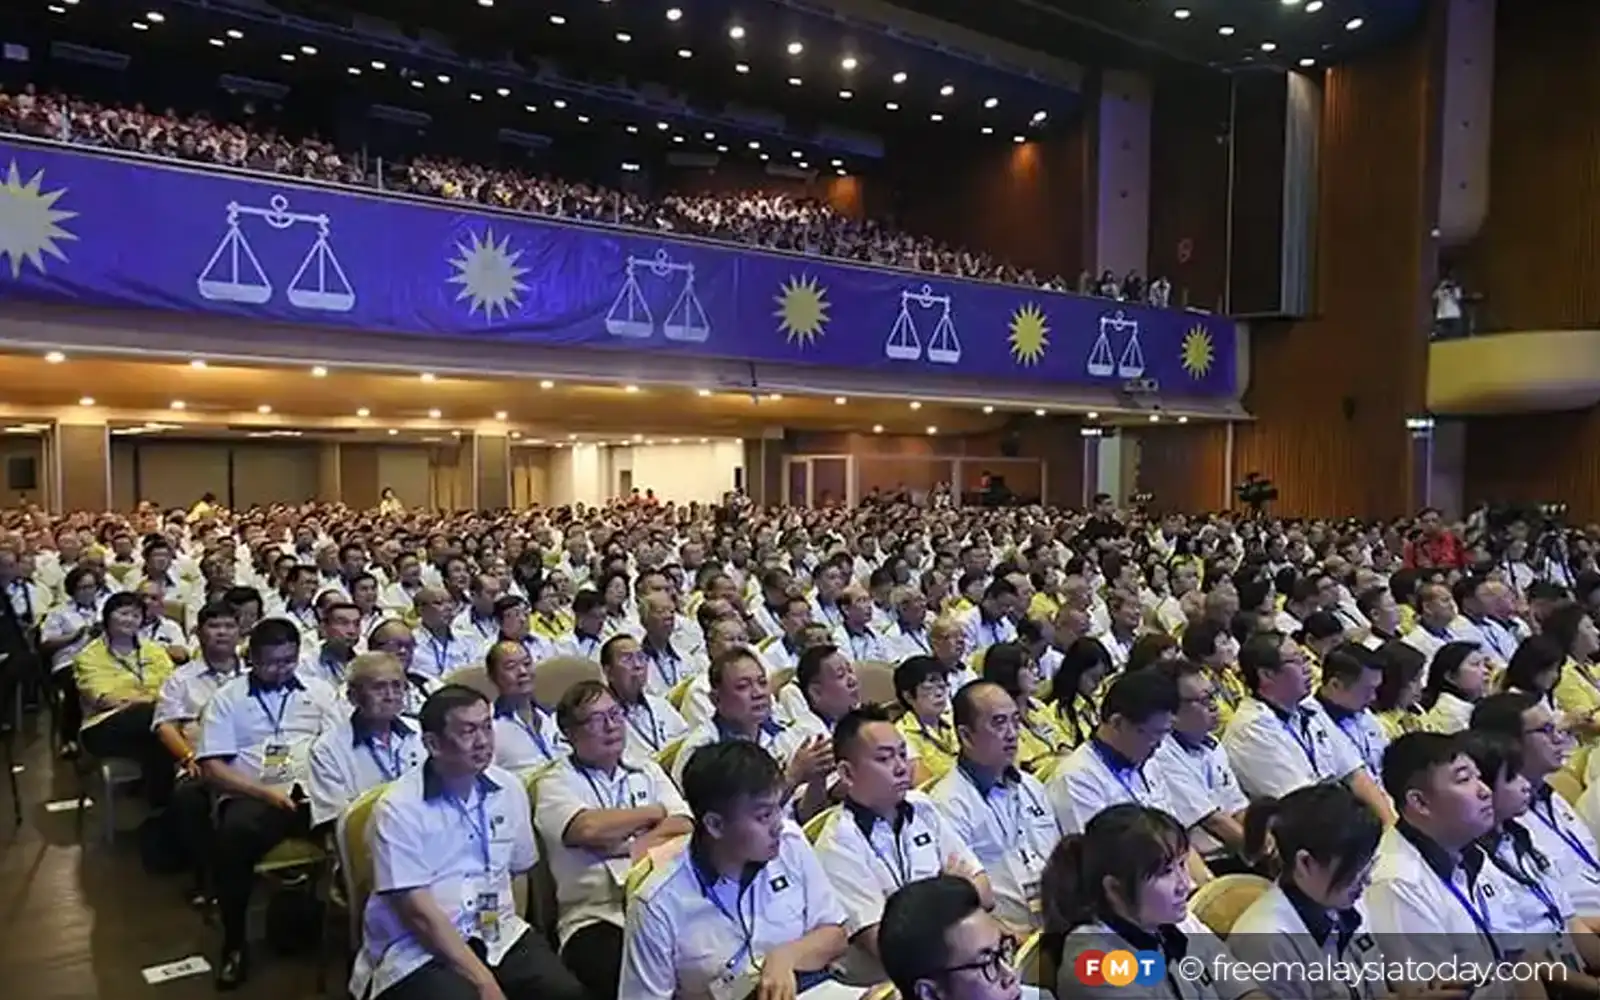 mca’s odds better with bn, analysts say